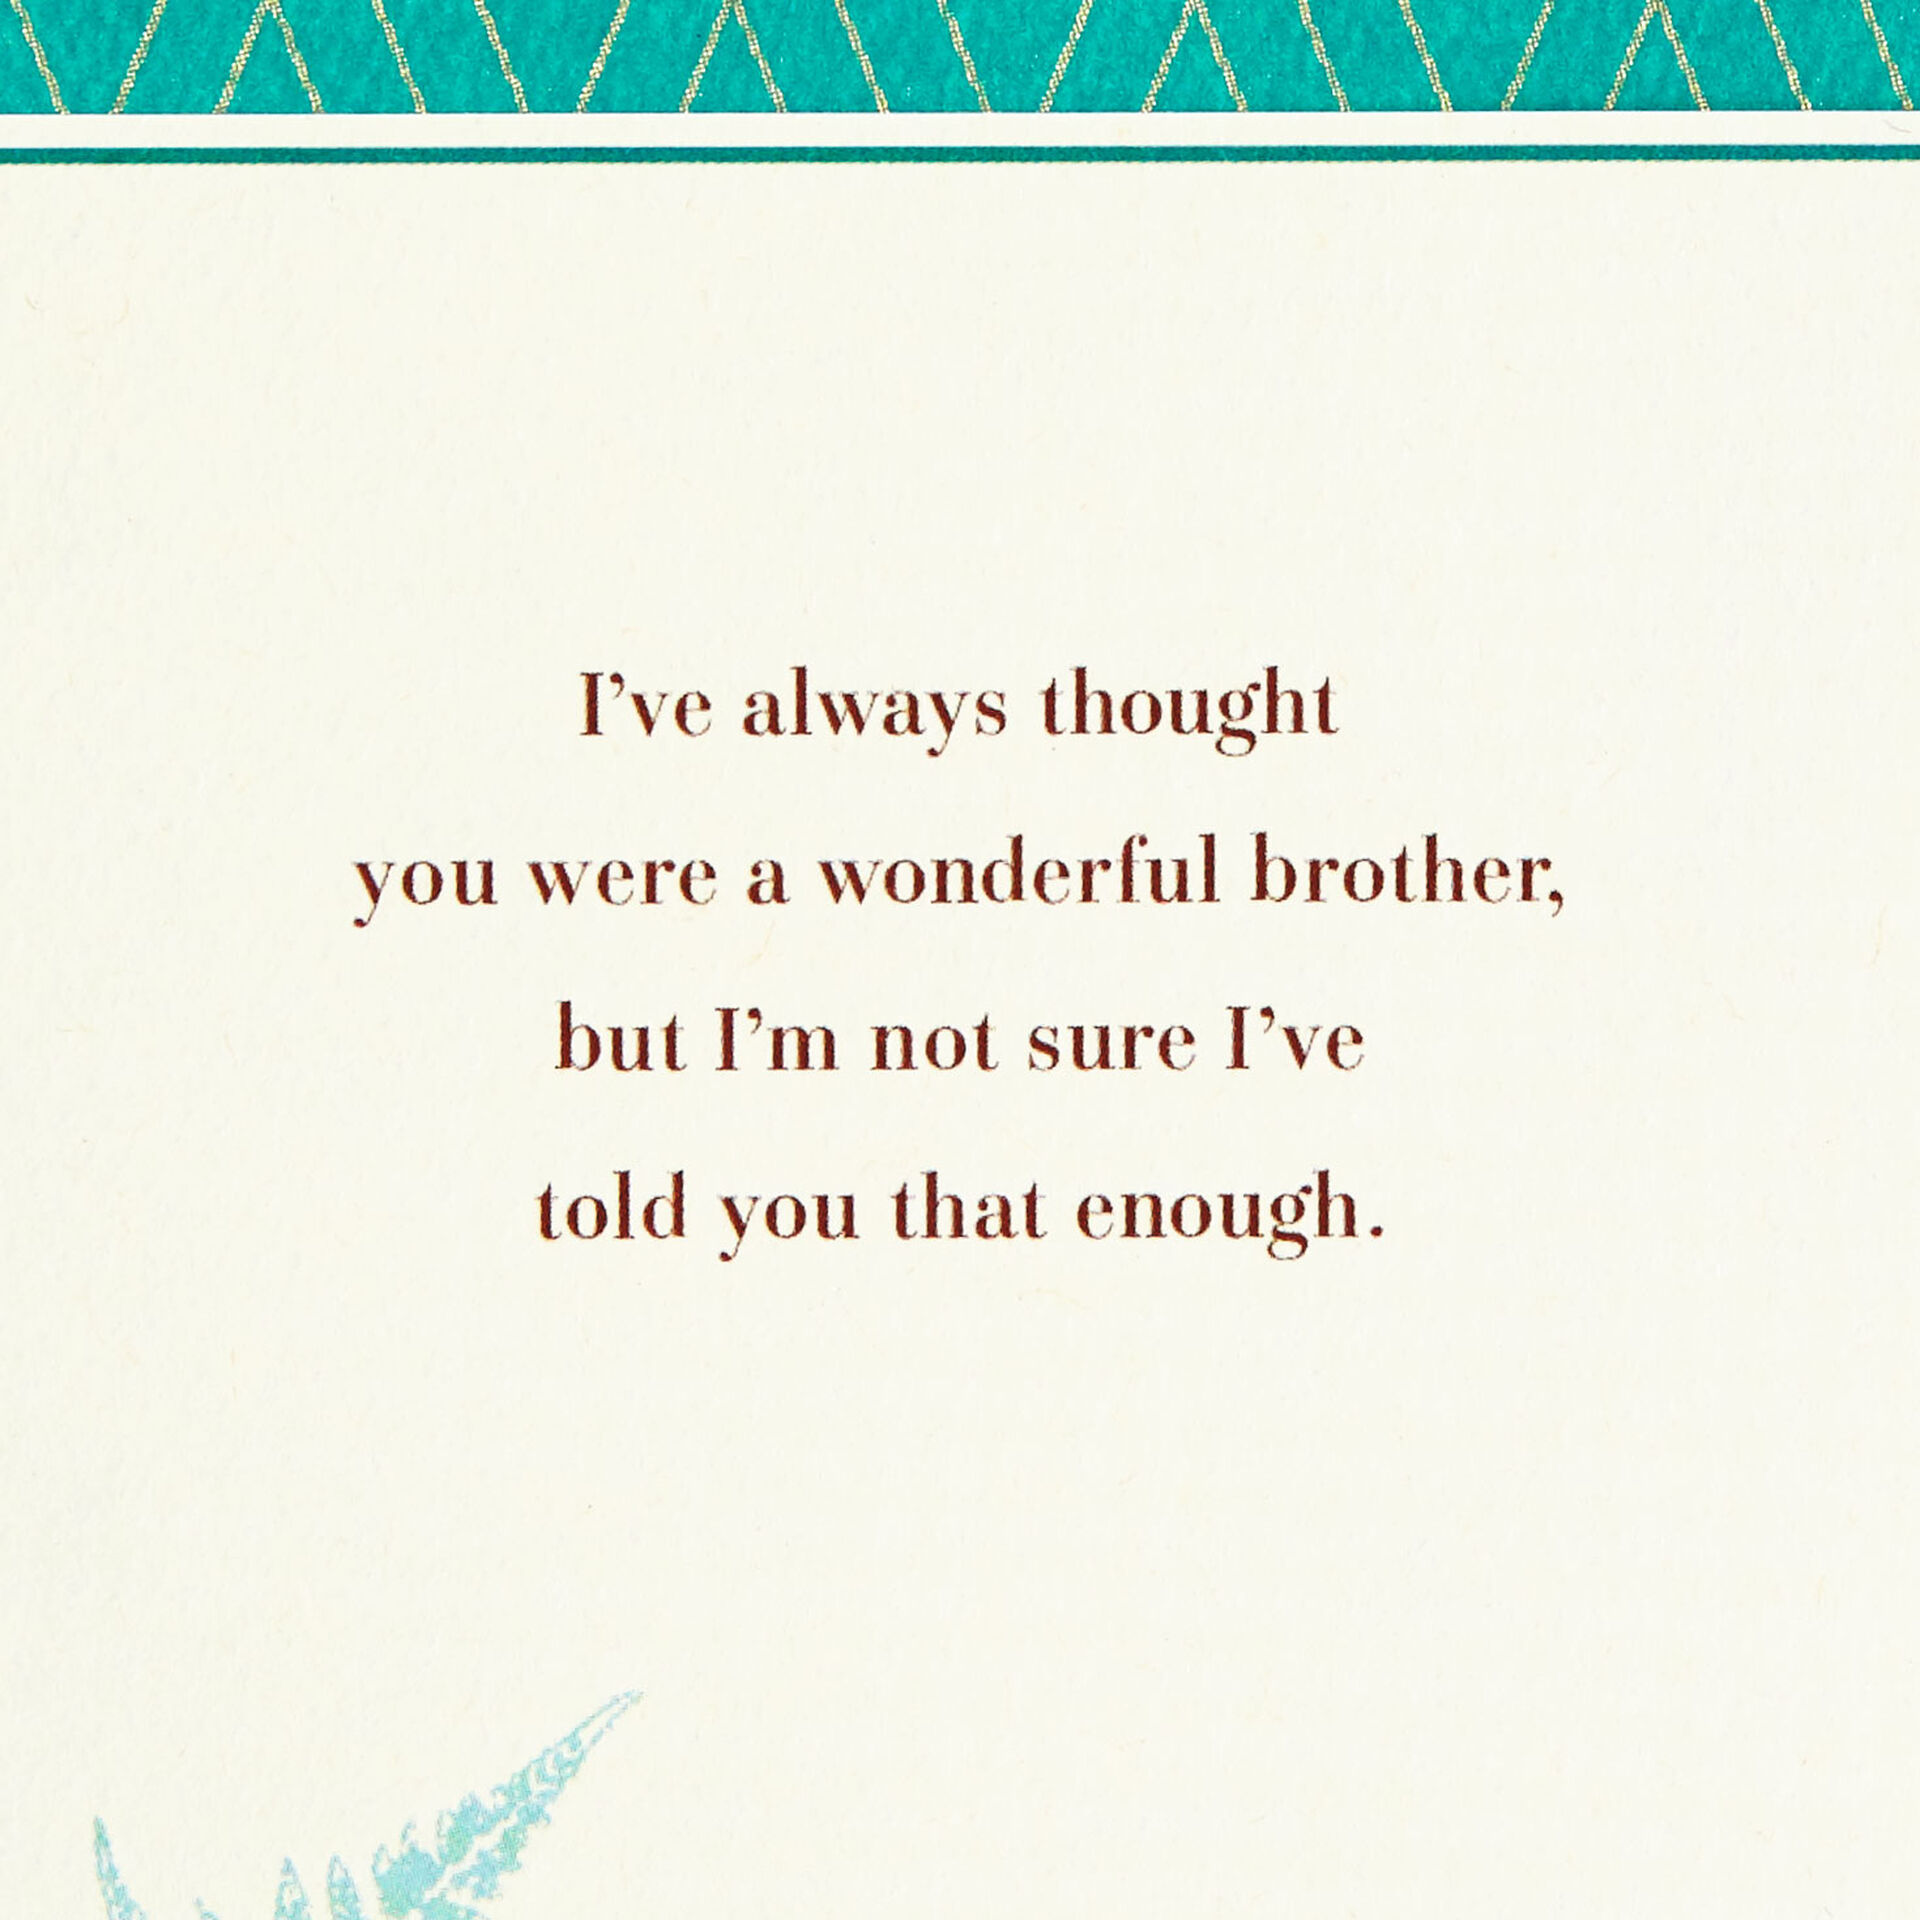 Palm-Leaves-Birthday-Card-for-Brother_599MAN3815_02